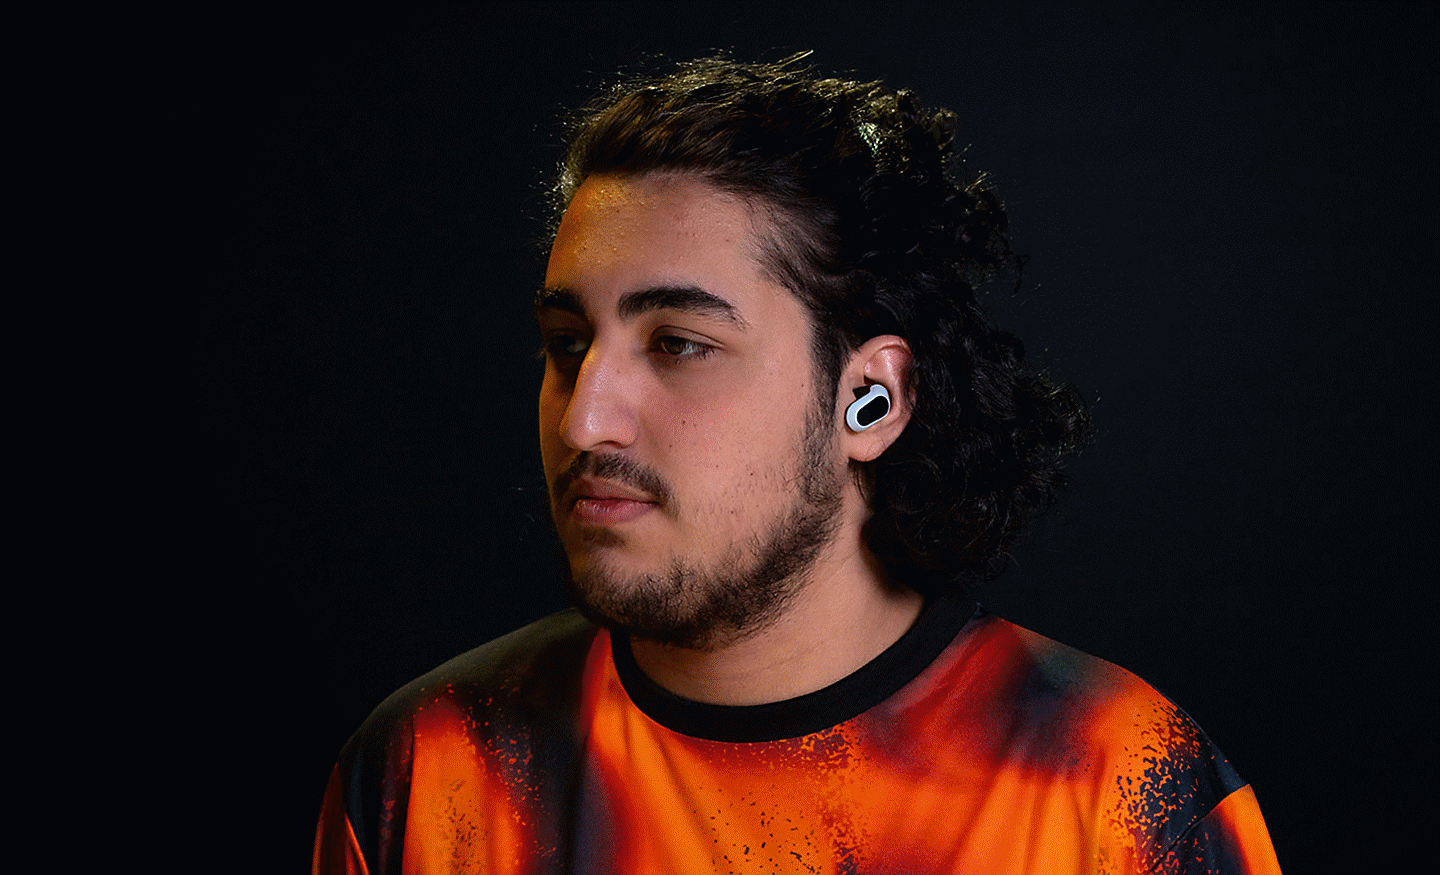 Profile image of Alfajer wearing a pair of white INZONE Buds